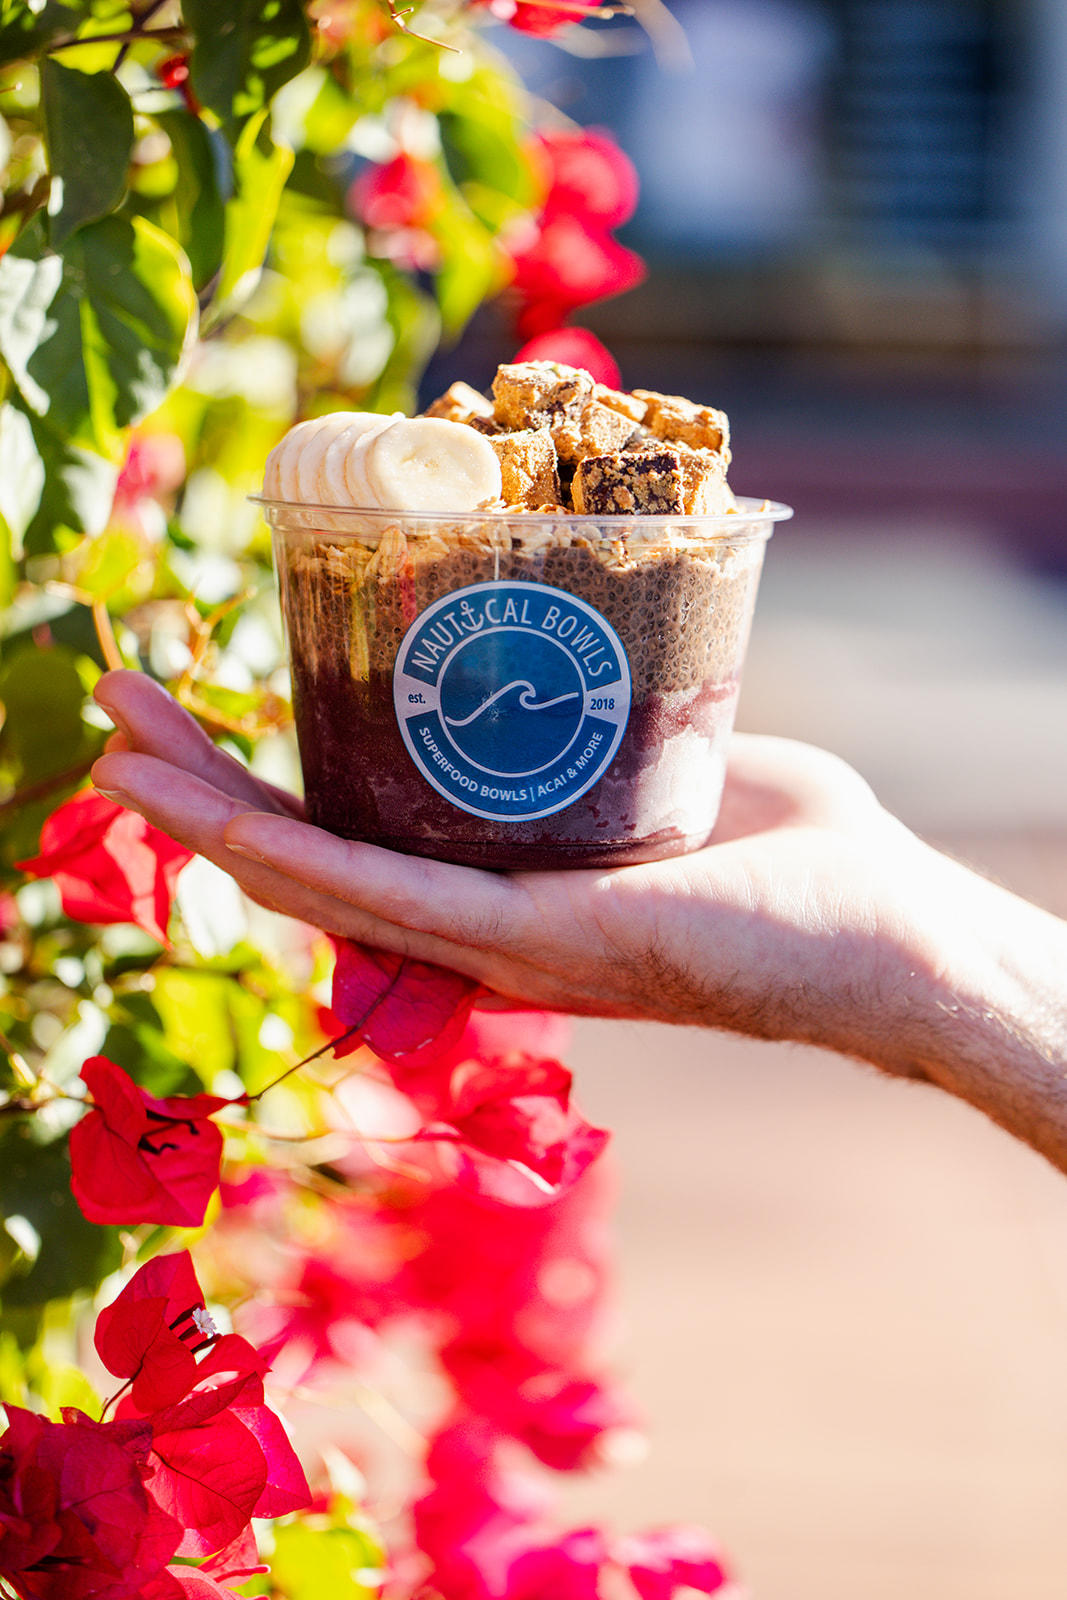 Come savor our mouthwatering Acai Bowls, Pitaya Bowls, and more, all made with fresh, gluten-free, dairy-free, soy-free, and 100% plant-based ingredients.